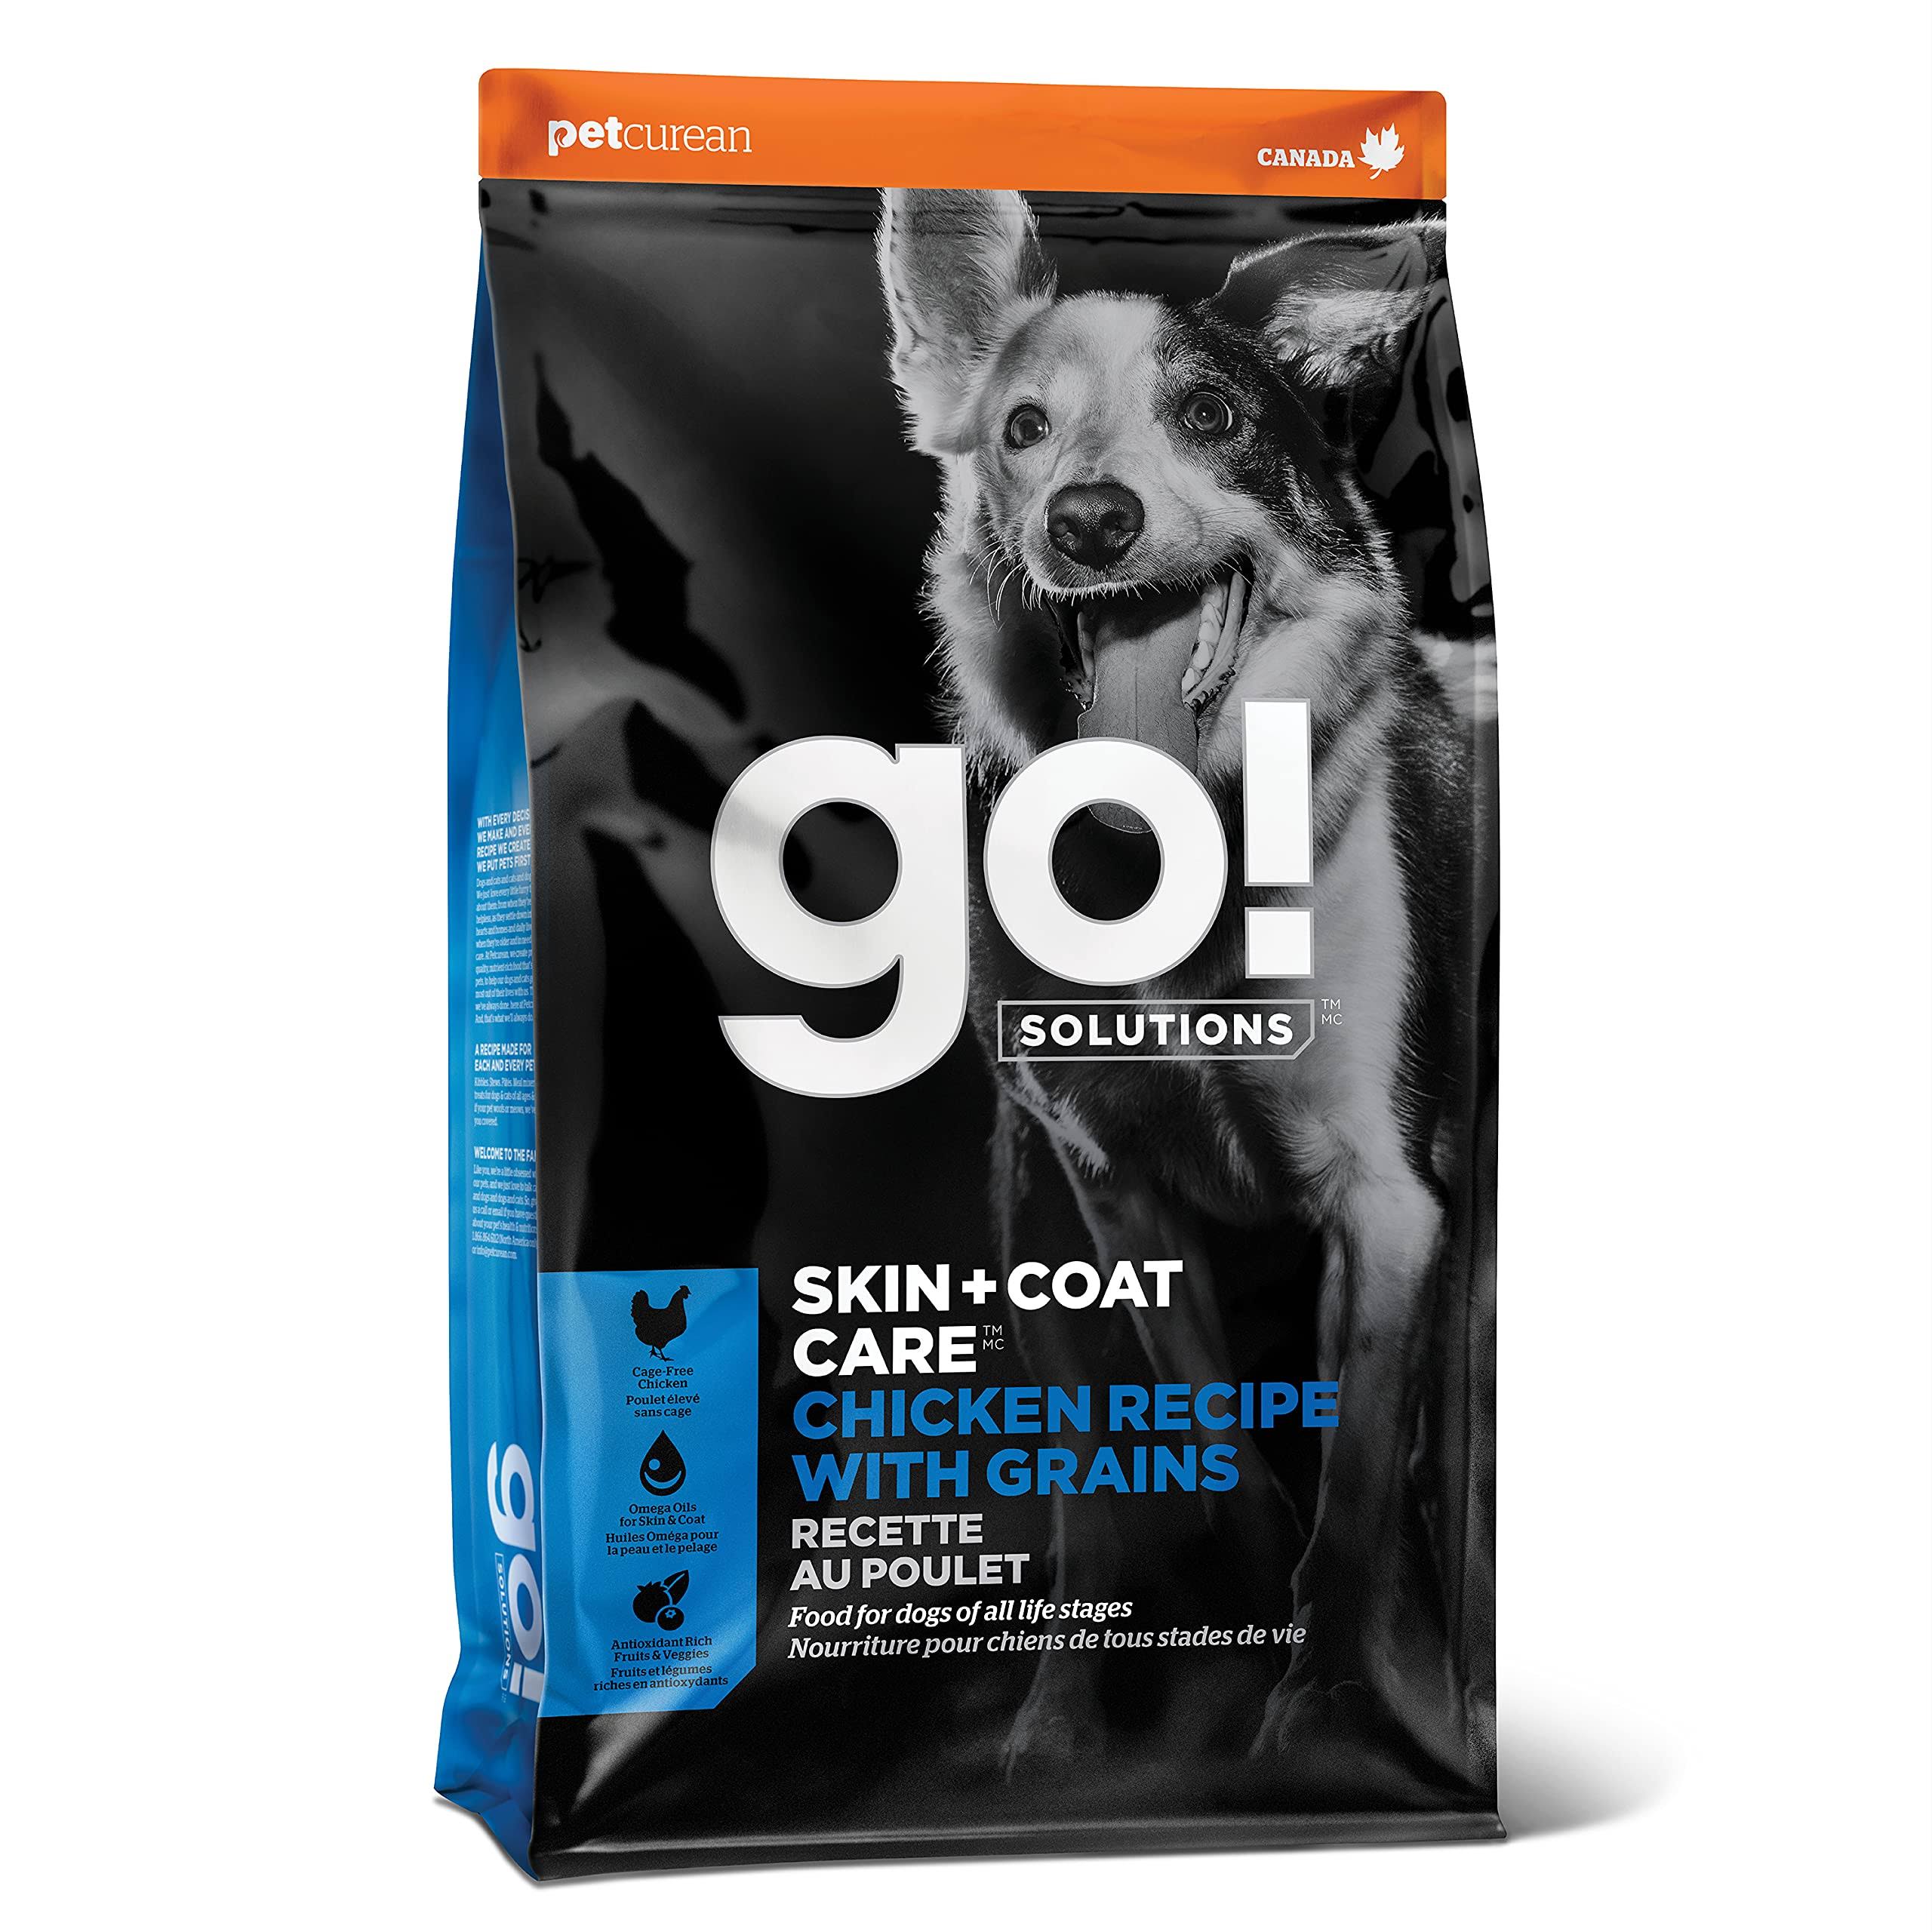 Go! Solutions Skin + Coat Care Chicken Recipe Dry Dog Food, 12 Pounds